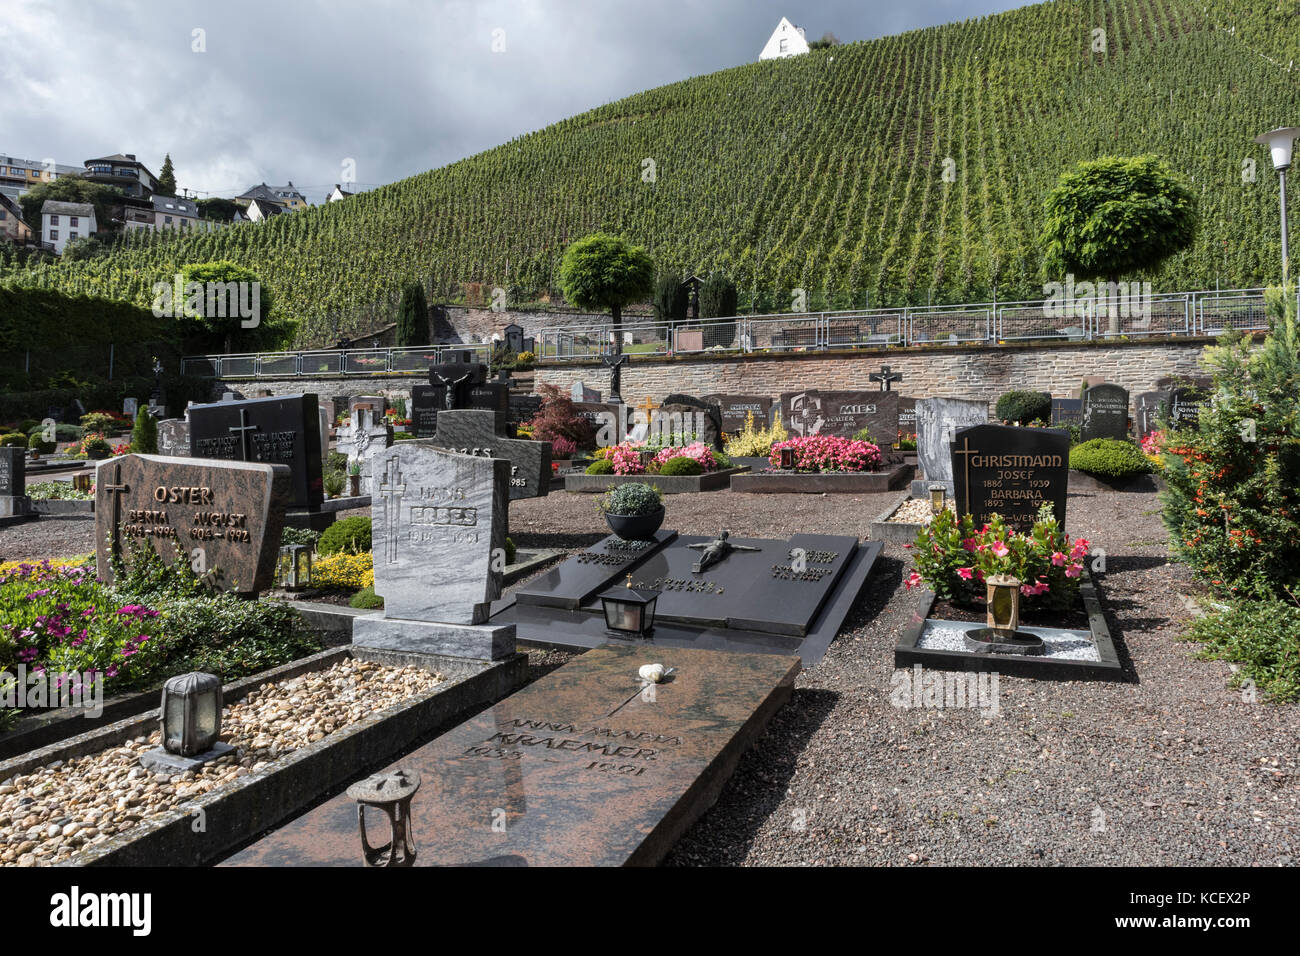 Graveyard in the town of Urzig, in the Mosel Valley, Germany, with Riesling vineyards in the background Stock Photo